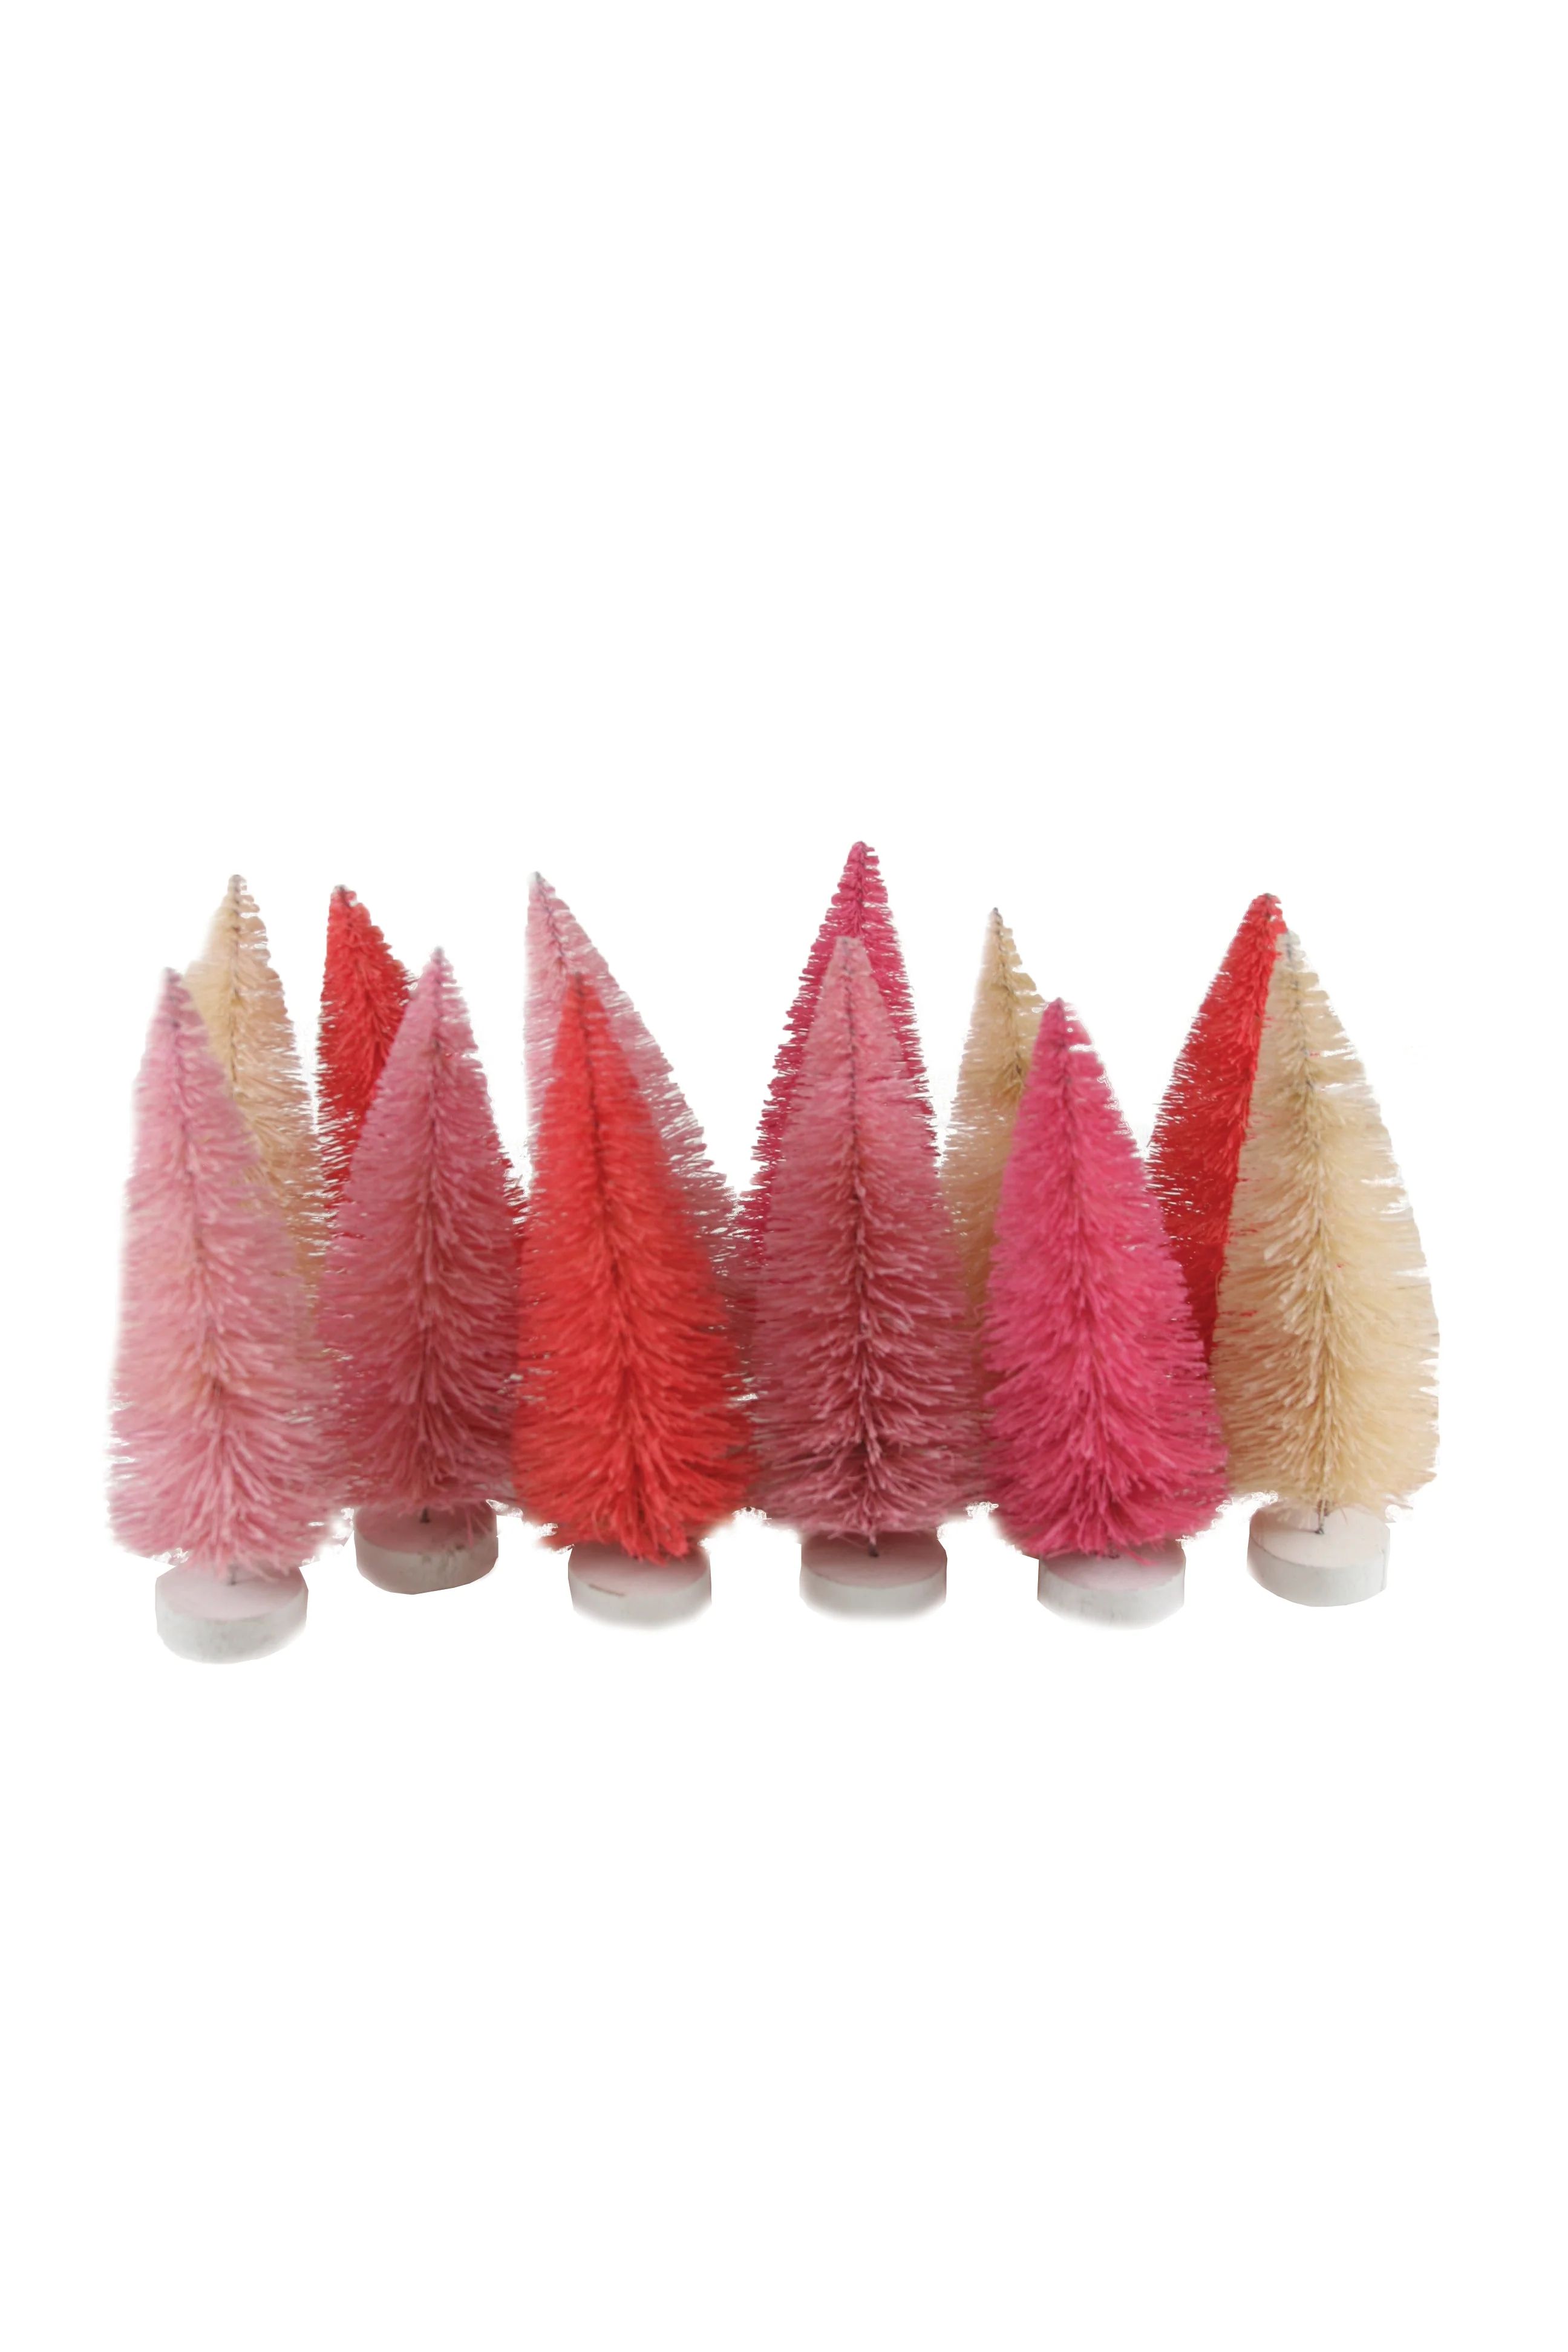 Hue Trees in Pink (Set of 12) Holiday Decor | Burke Decor